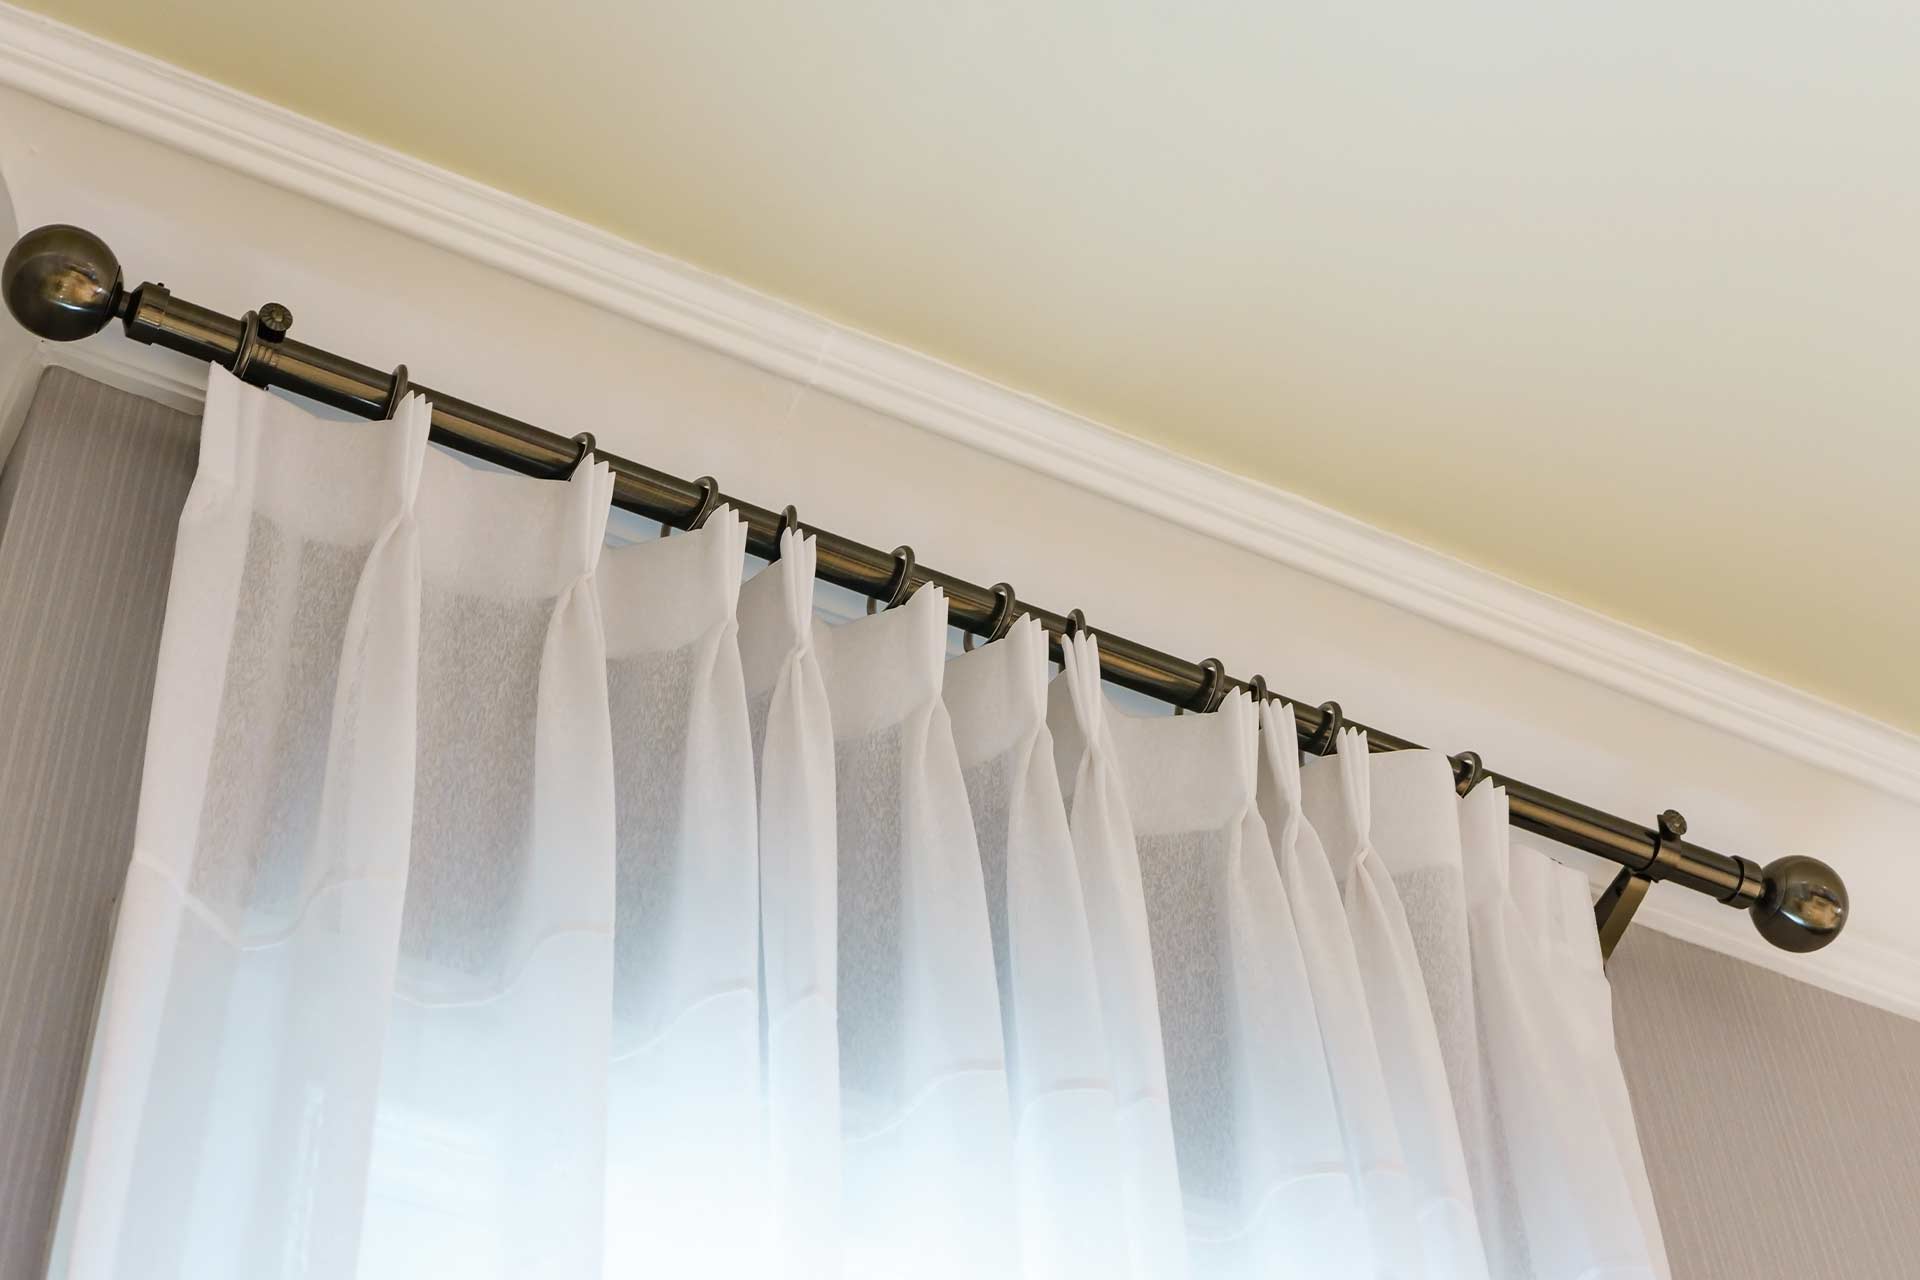 How Do You Hang Curtains With Rings | Storables